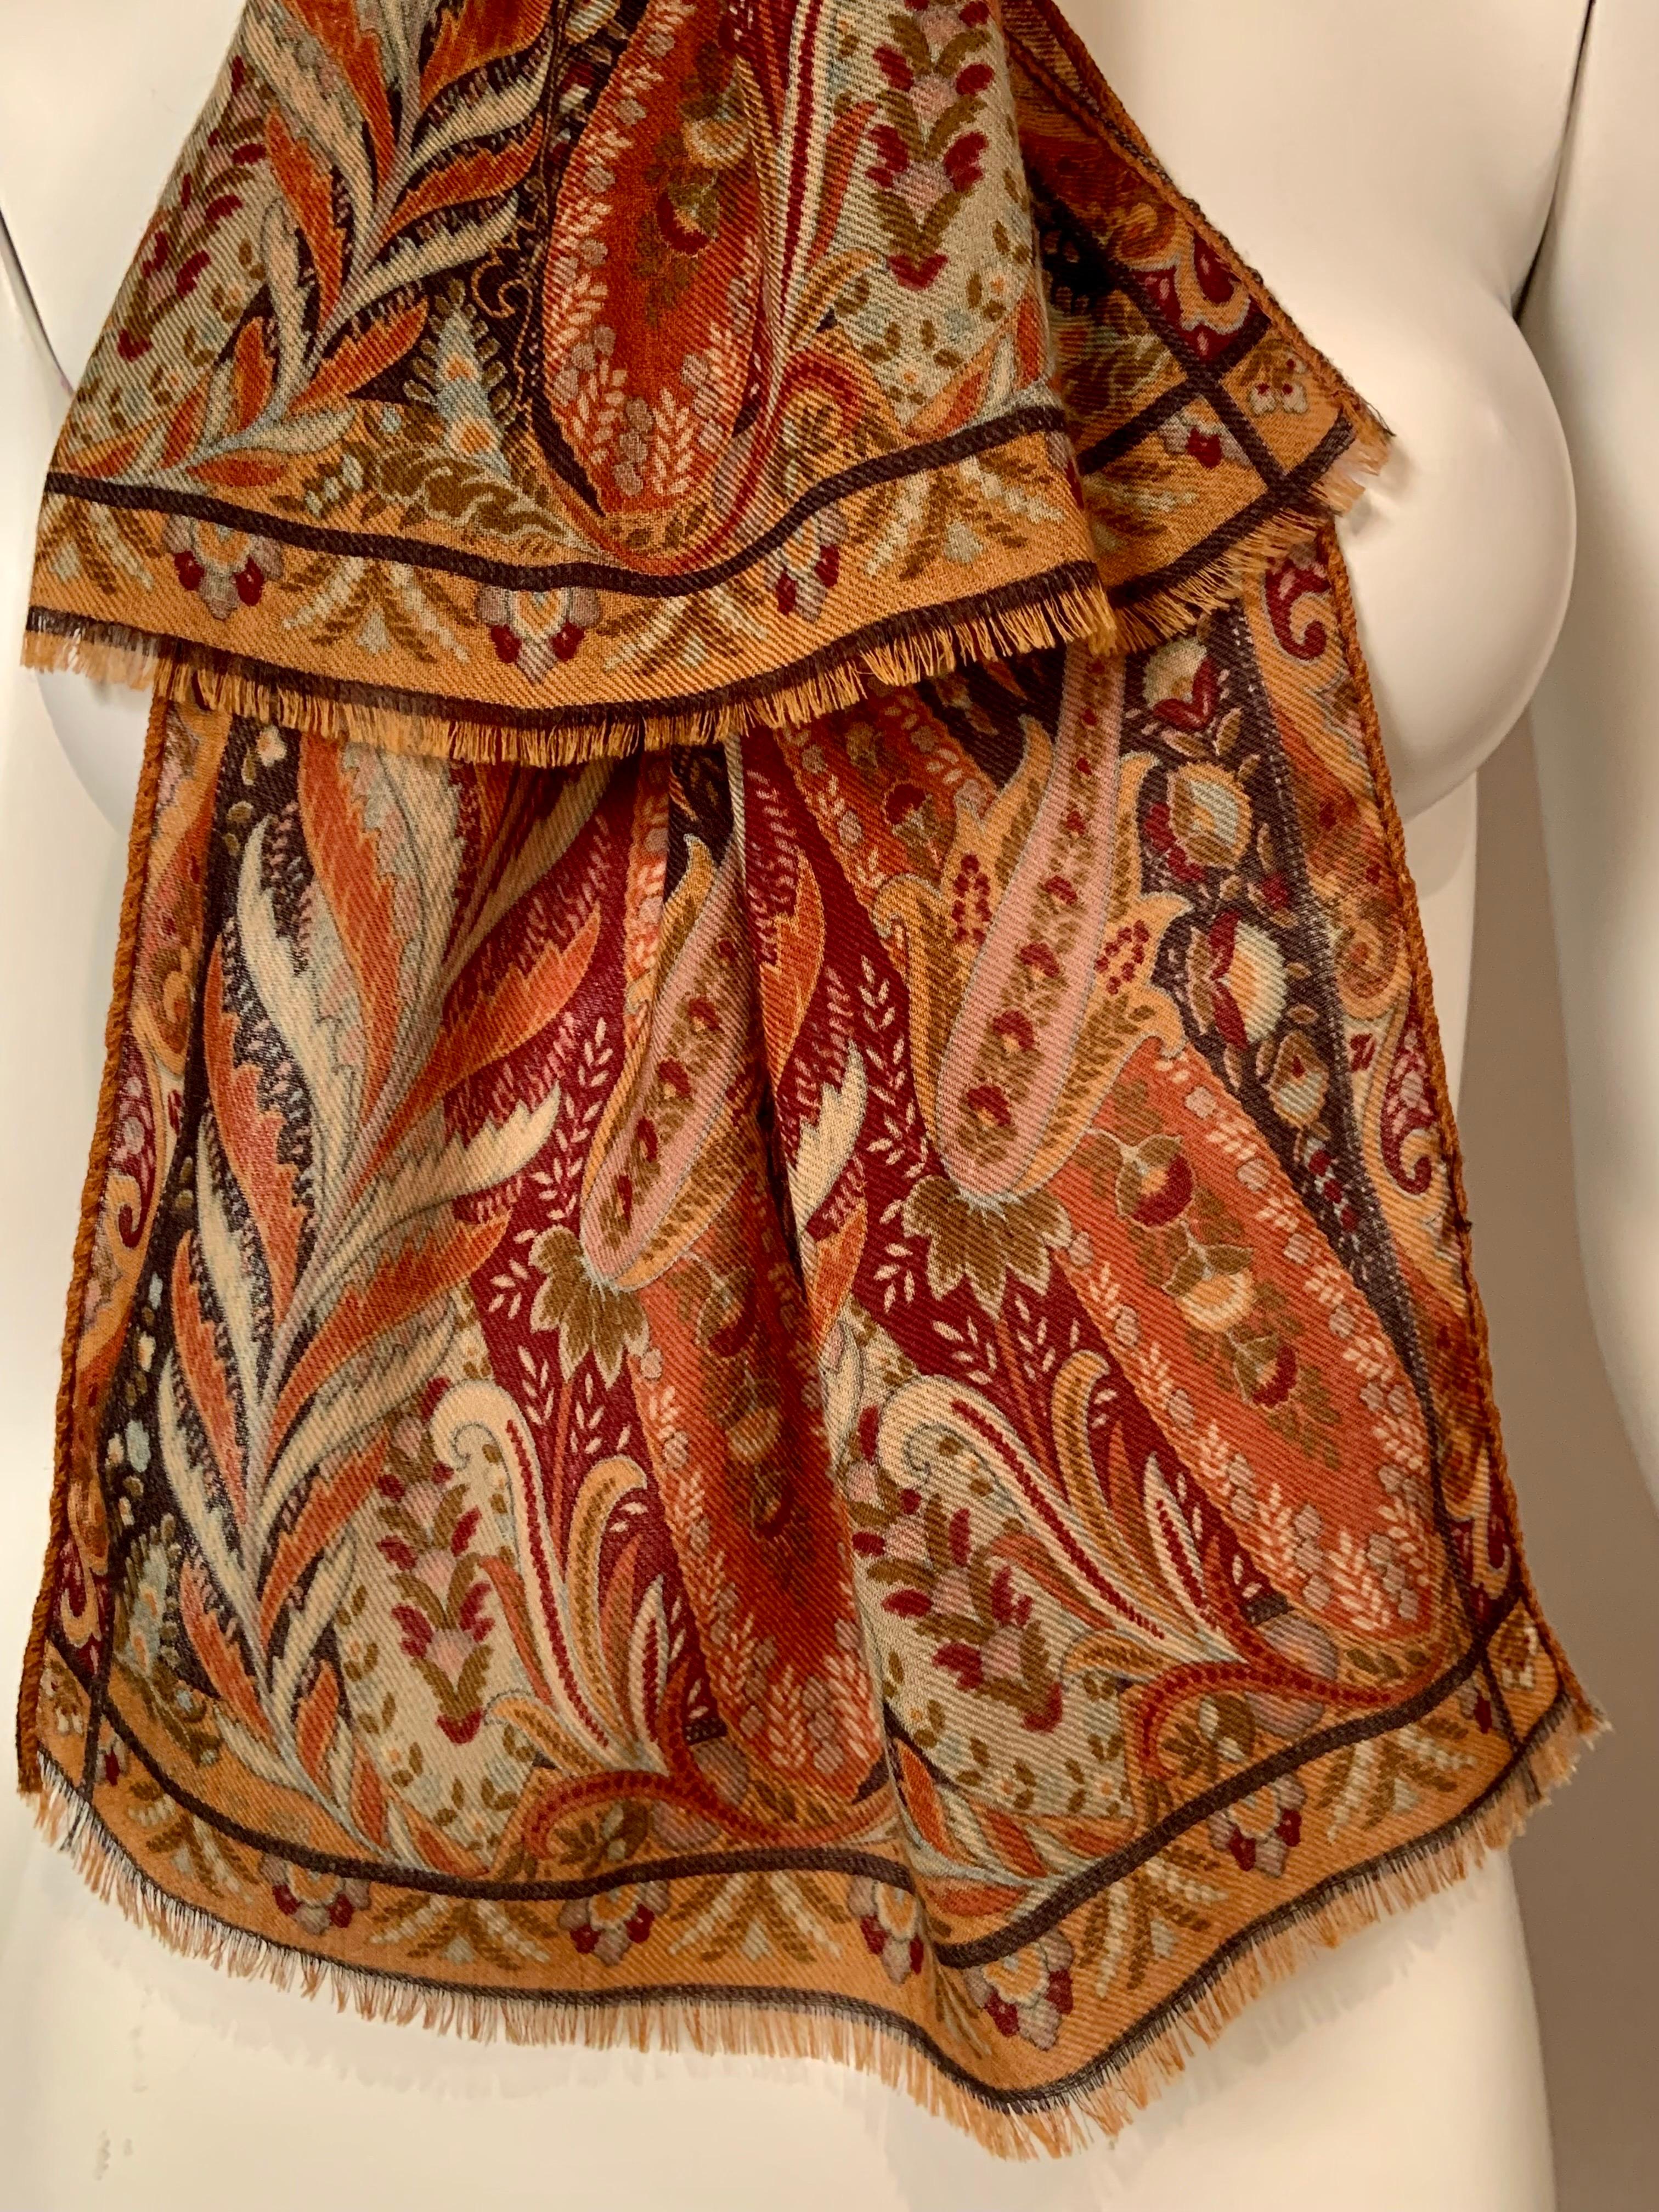 This paisley scarf from Etro has a striking mustard colored background and the center has floral garlands.  The scarf has shades of burgundy, orange, pale green, black and blue in the design and it is in excellent condition.
Measurements;   Length